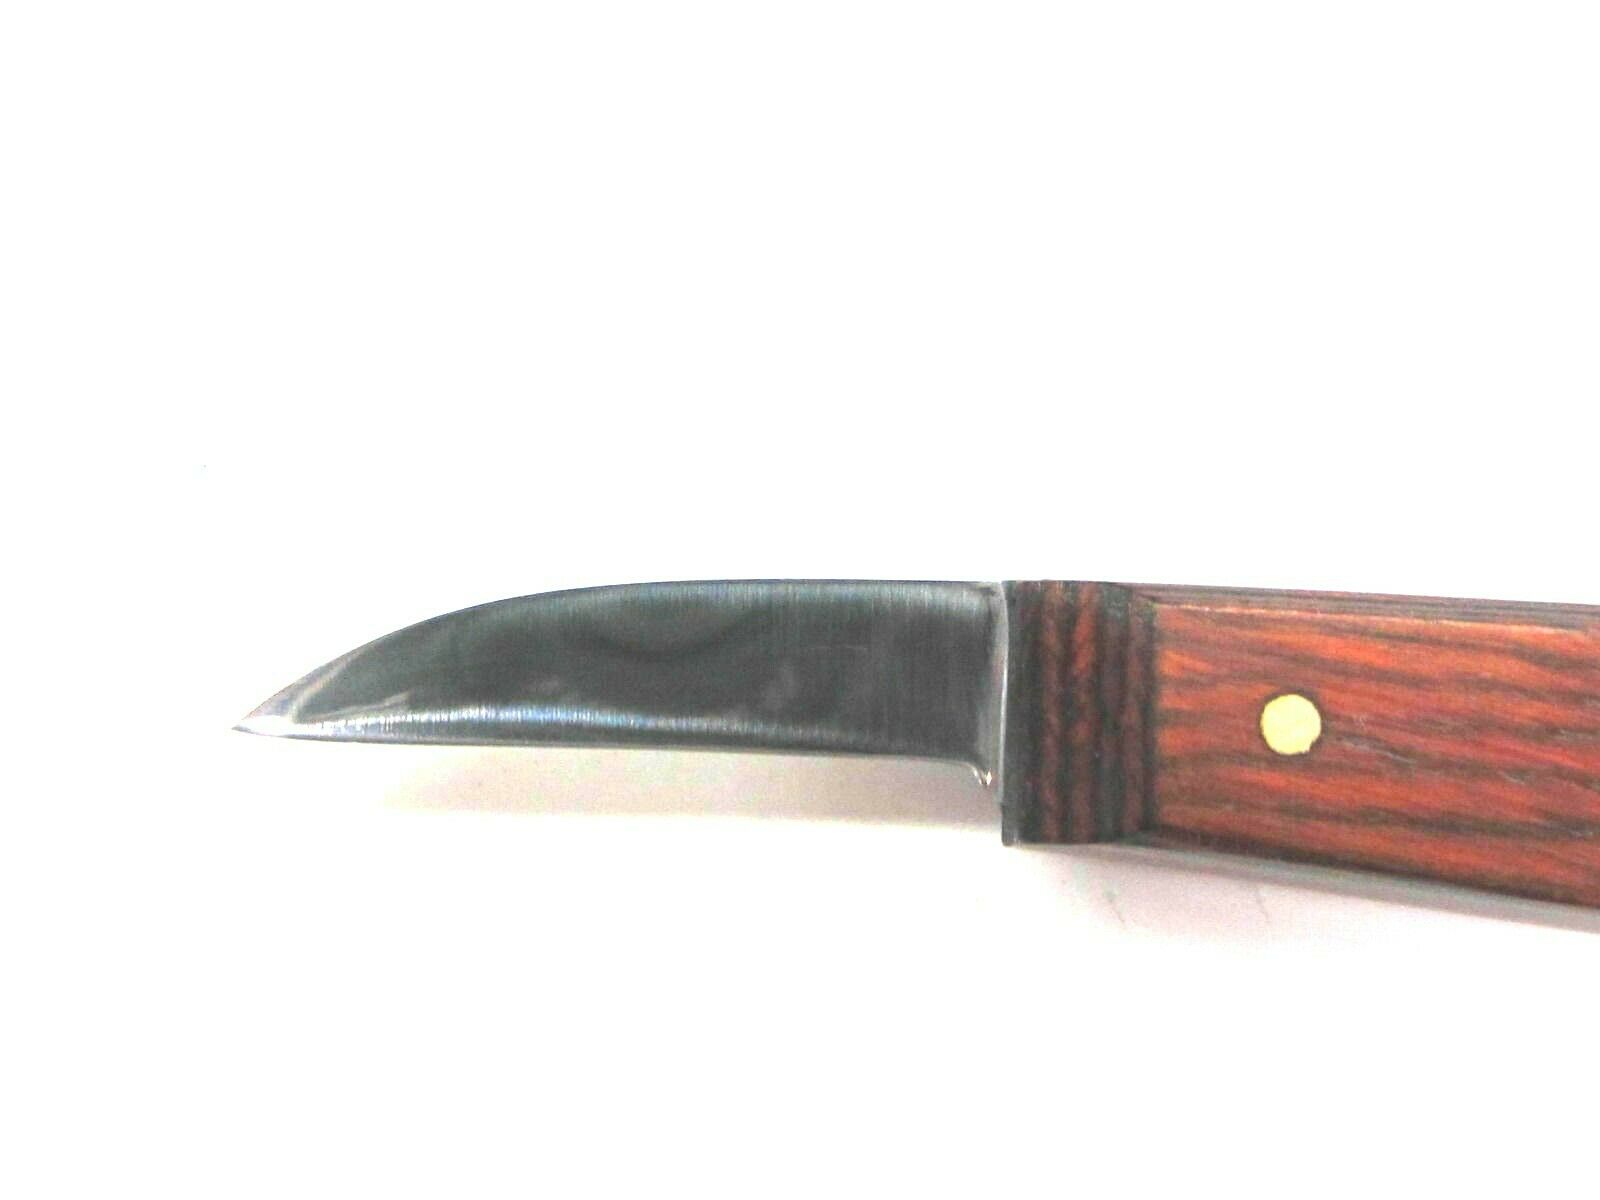 UJ Ramelson Beginners Bench Carving Knife